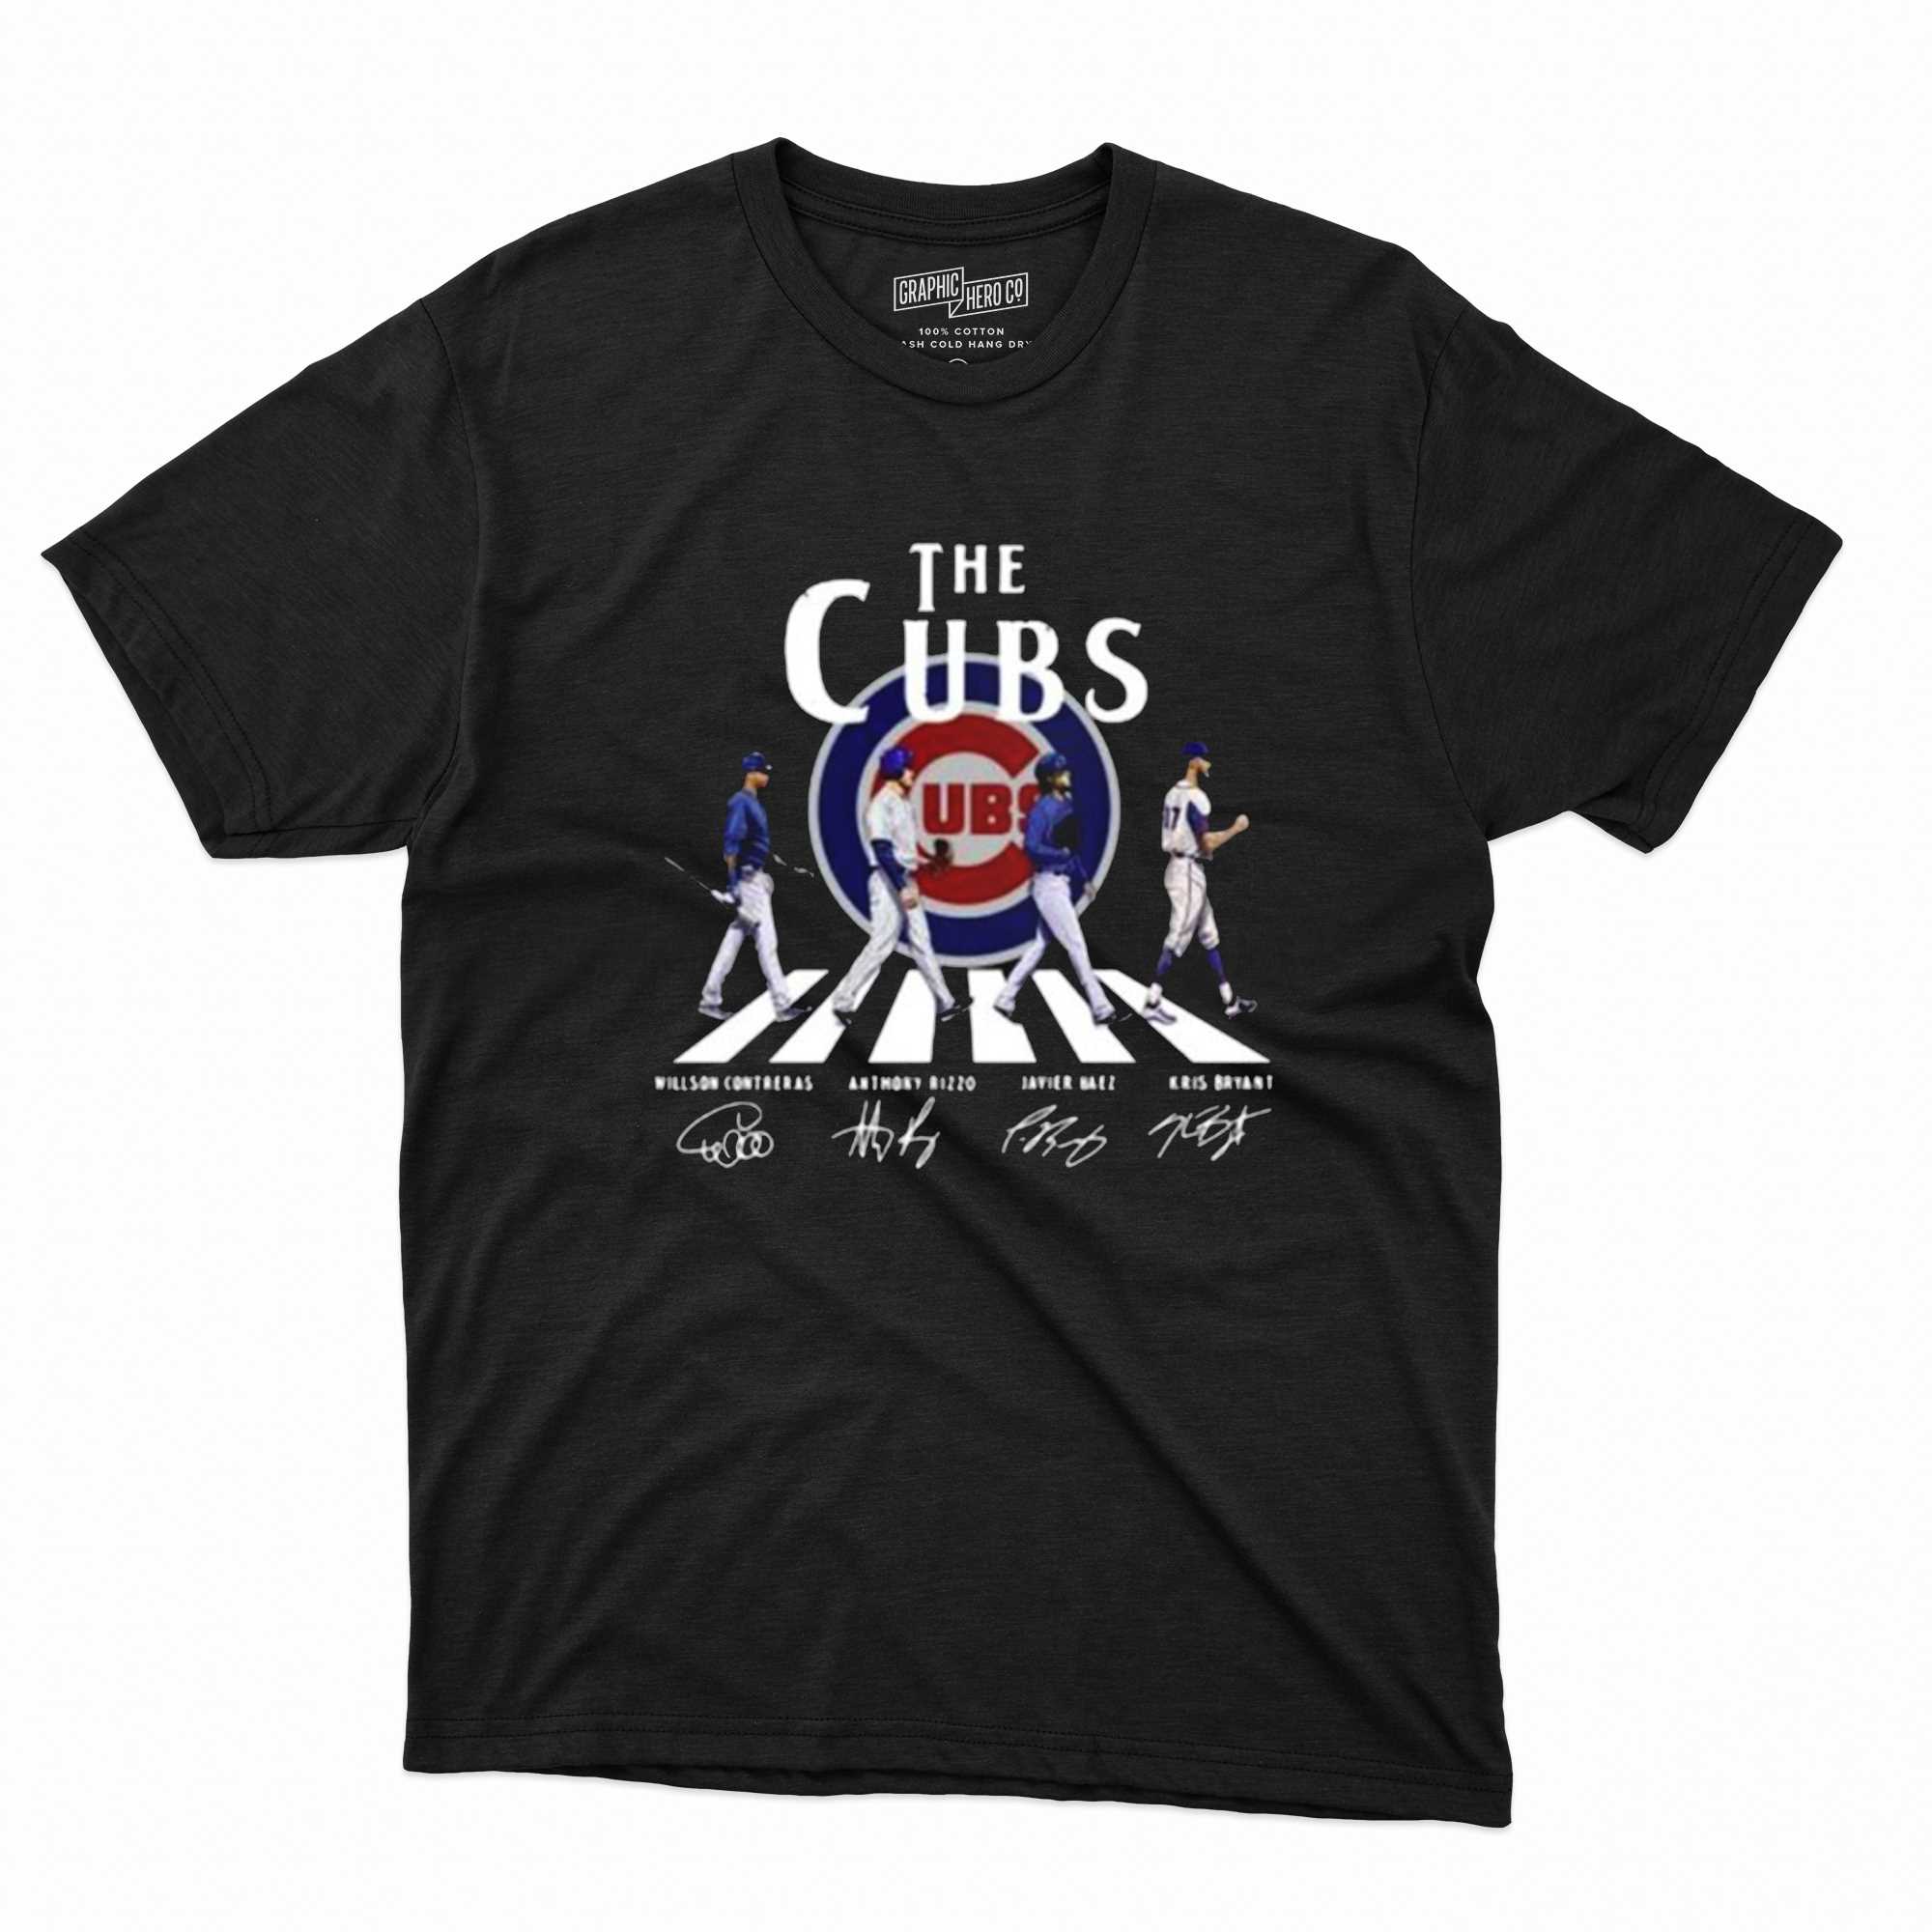 Chicago Cubs Apparel, Merchandise & Cubs Gifts